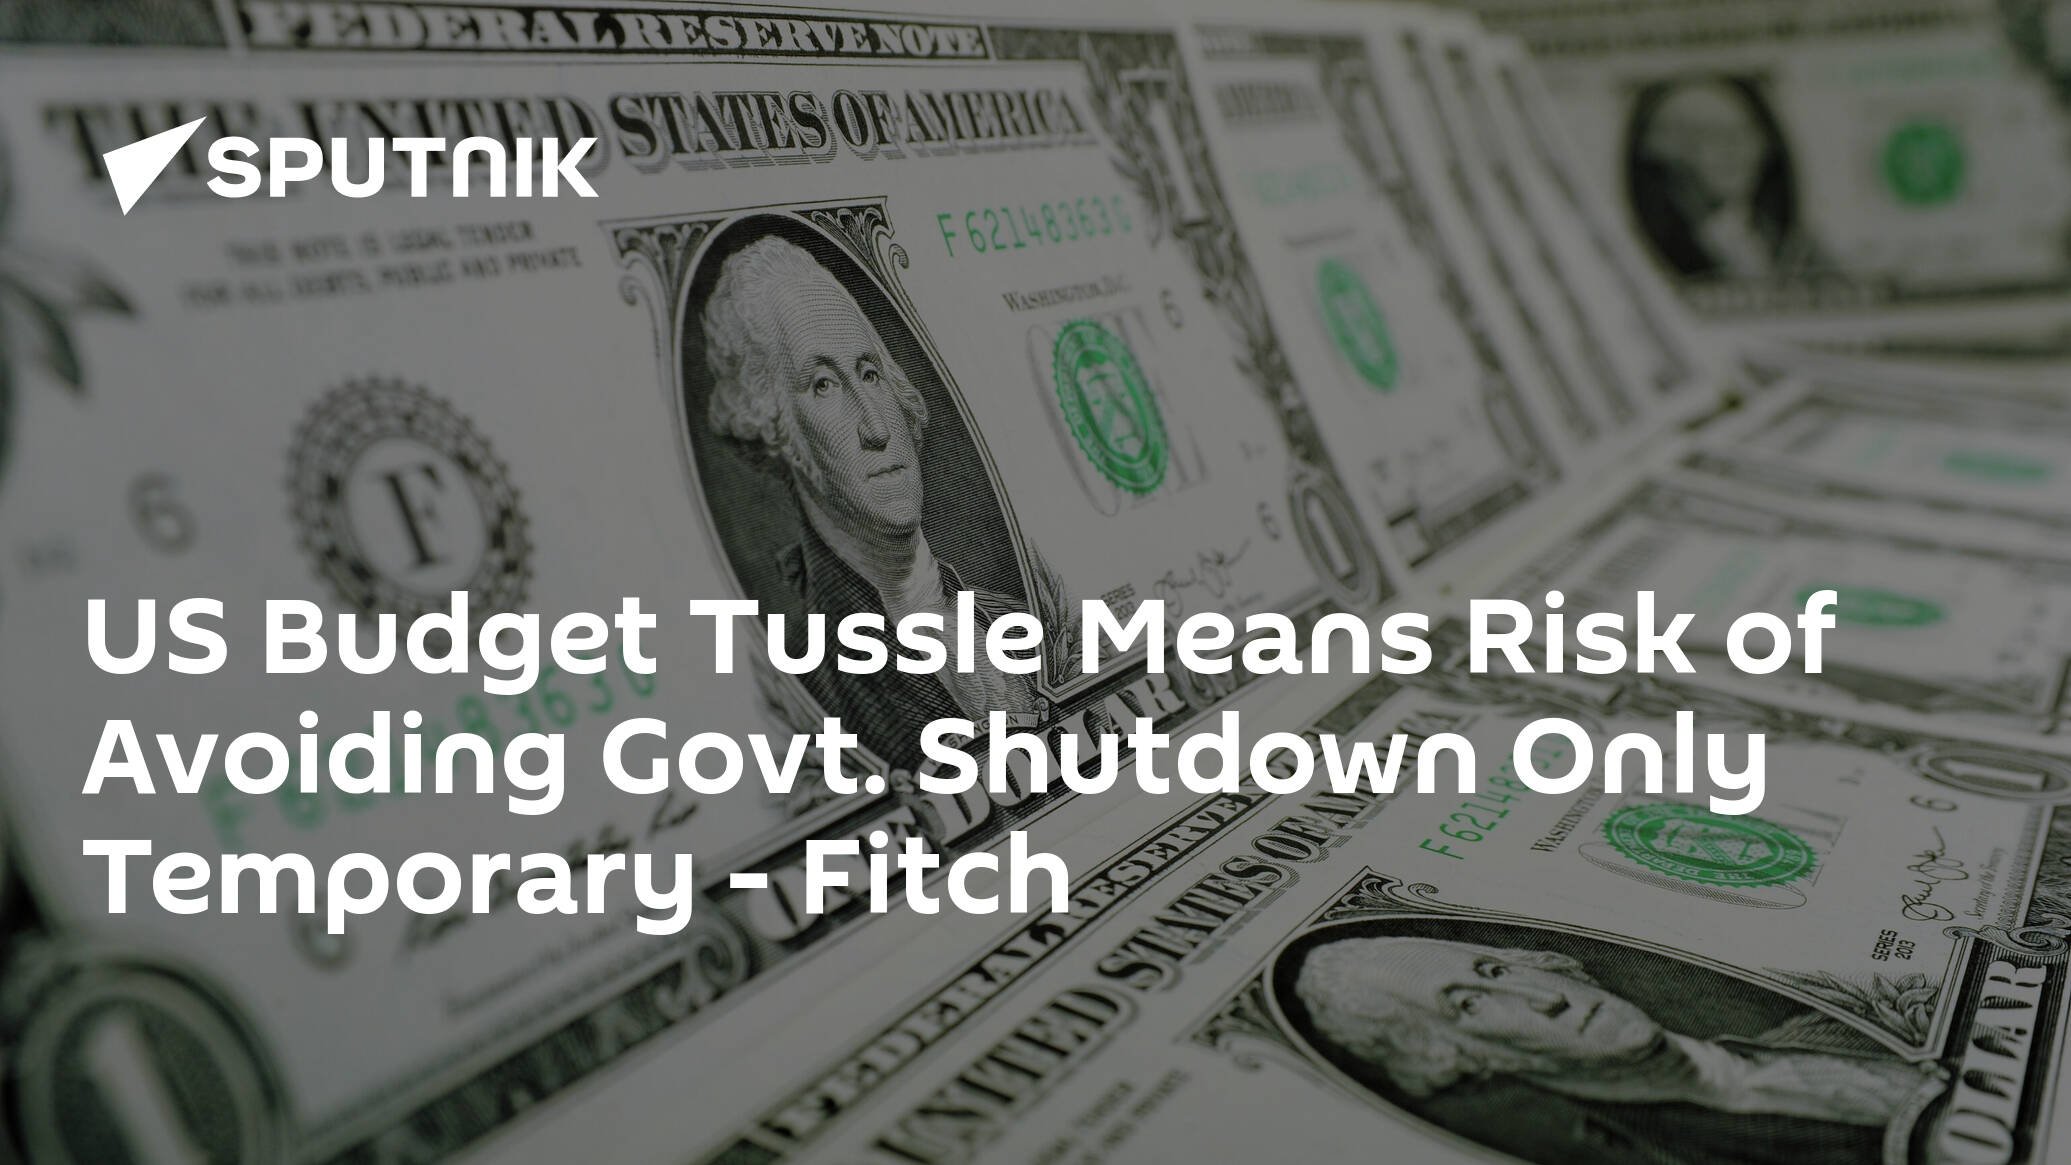 US Budget Tussle Means Risk of Avoiding Govt. Shutdown Only Temporary – Fitch